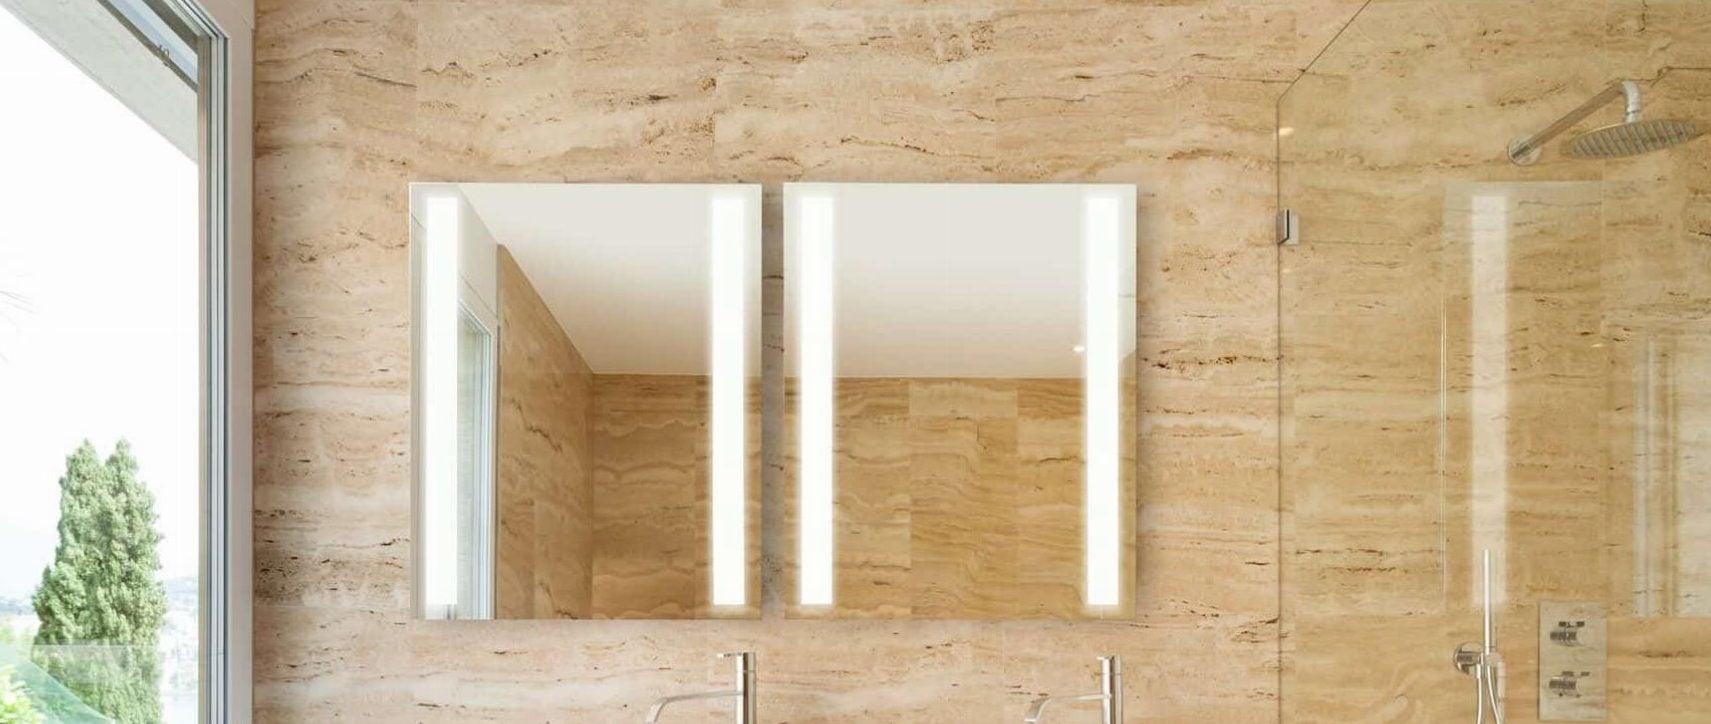 Sidler Redefines The Traditional Medicine Cabinet With The Sidelight